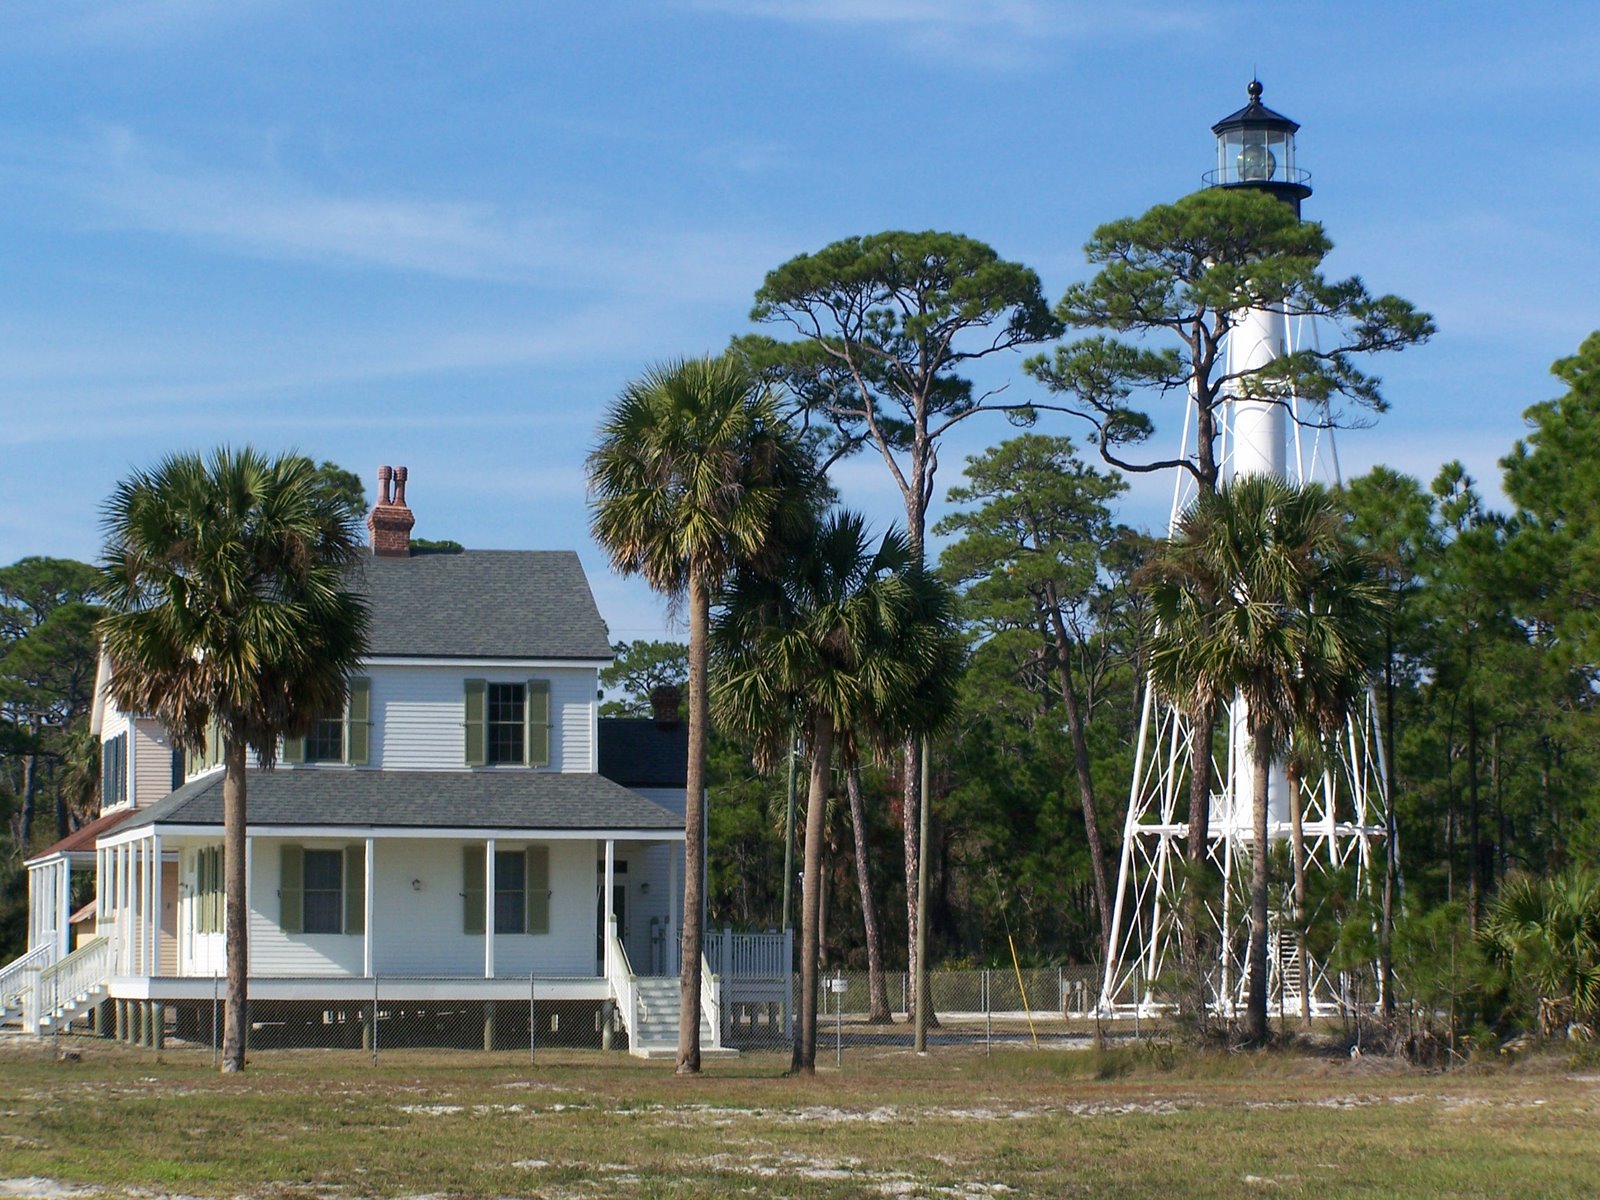 [Constitution+Convention+State+Museum,+us+working,+Lighthouse+022.jpg]